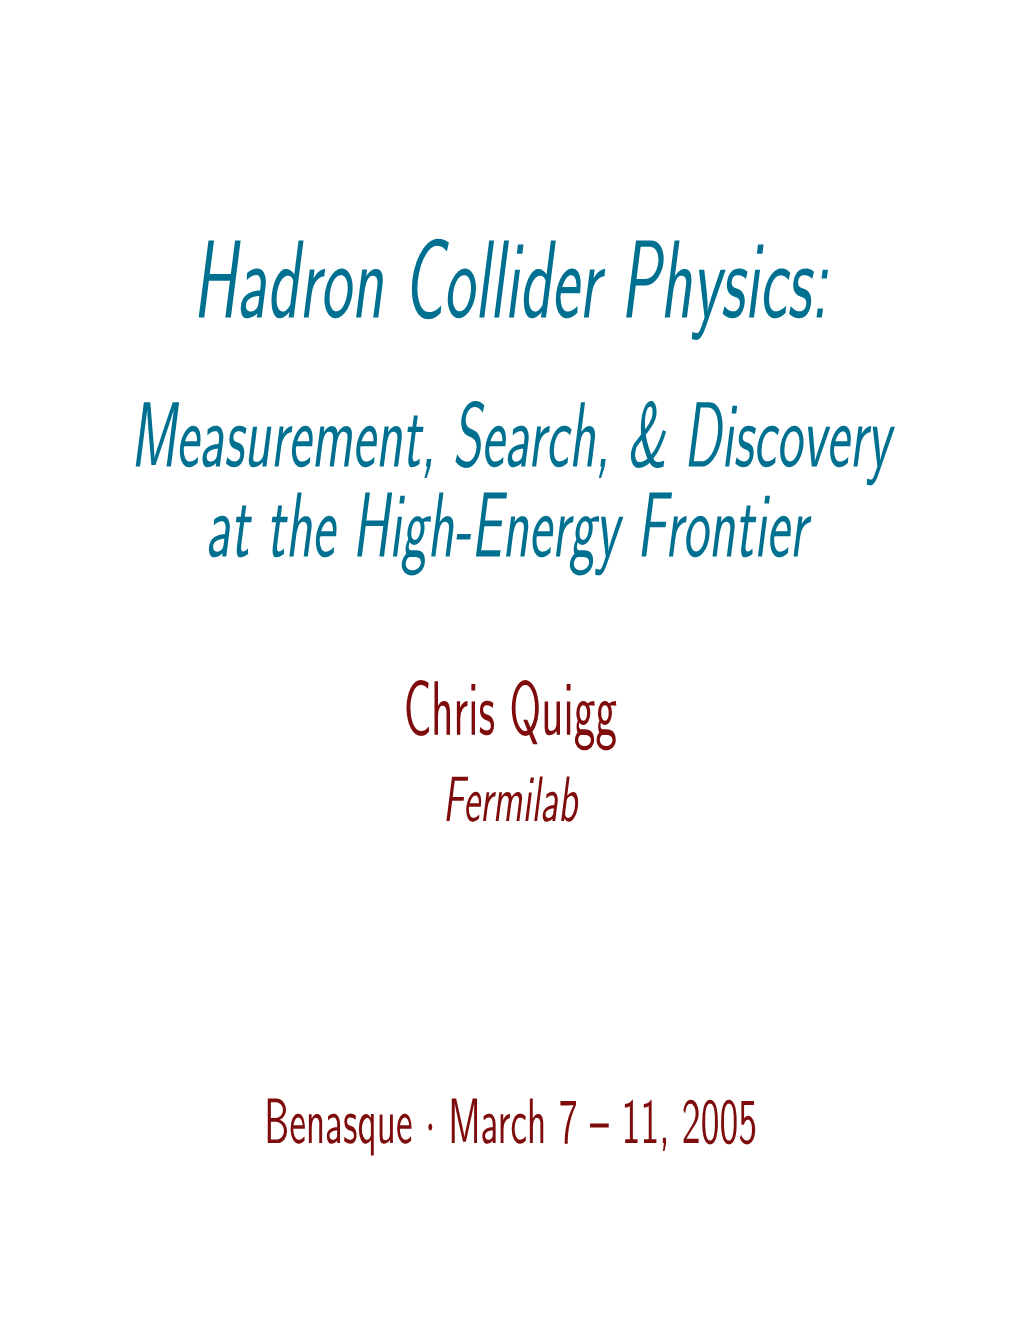 Hadron Collider Physics: Measurement, Search, & Discovery at the High-Energy Frontier